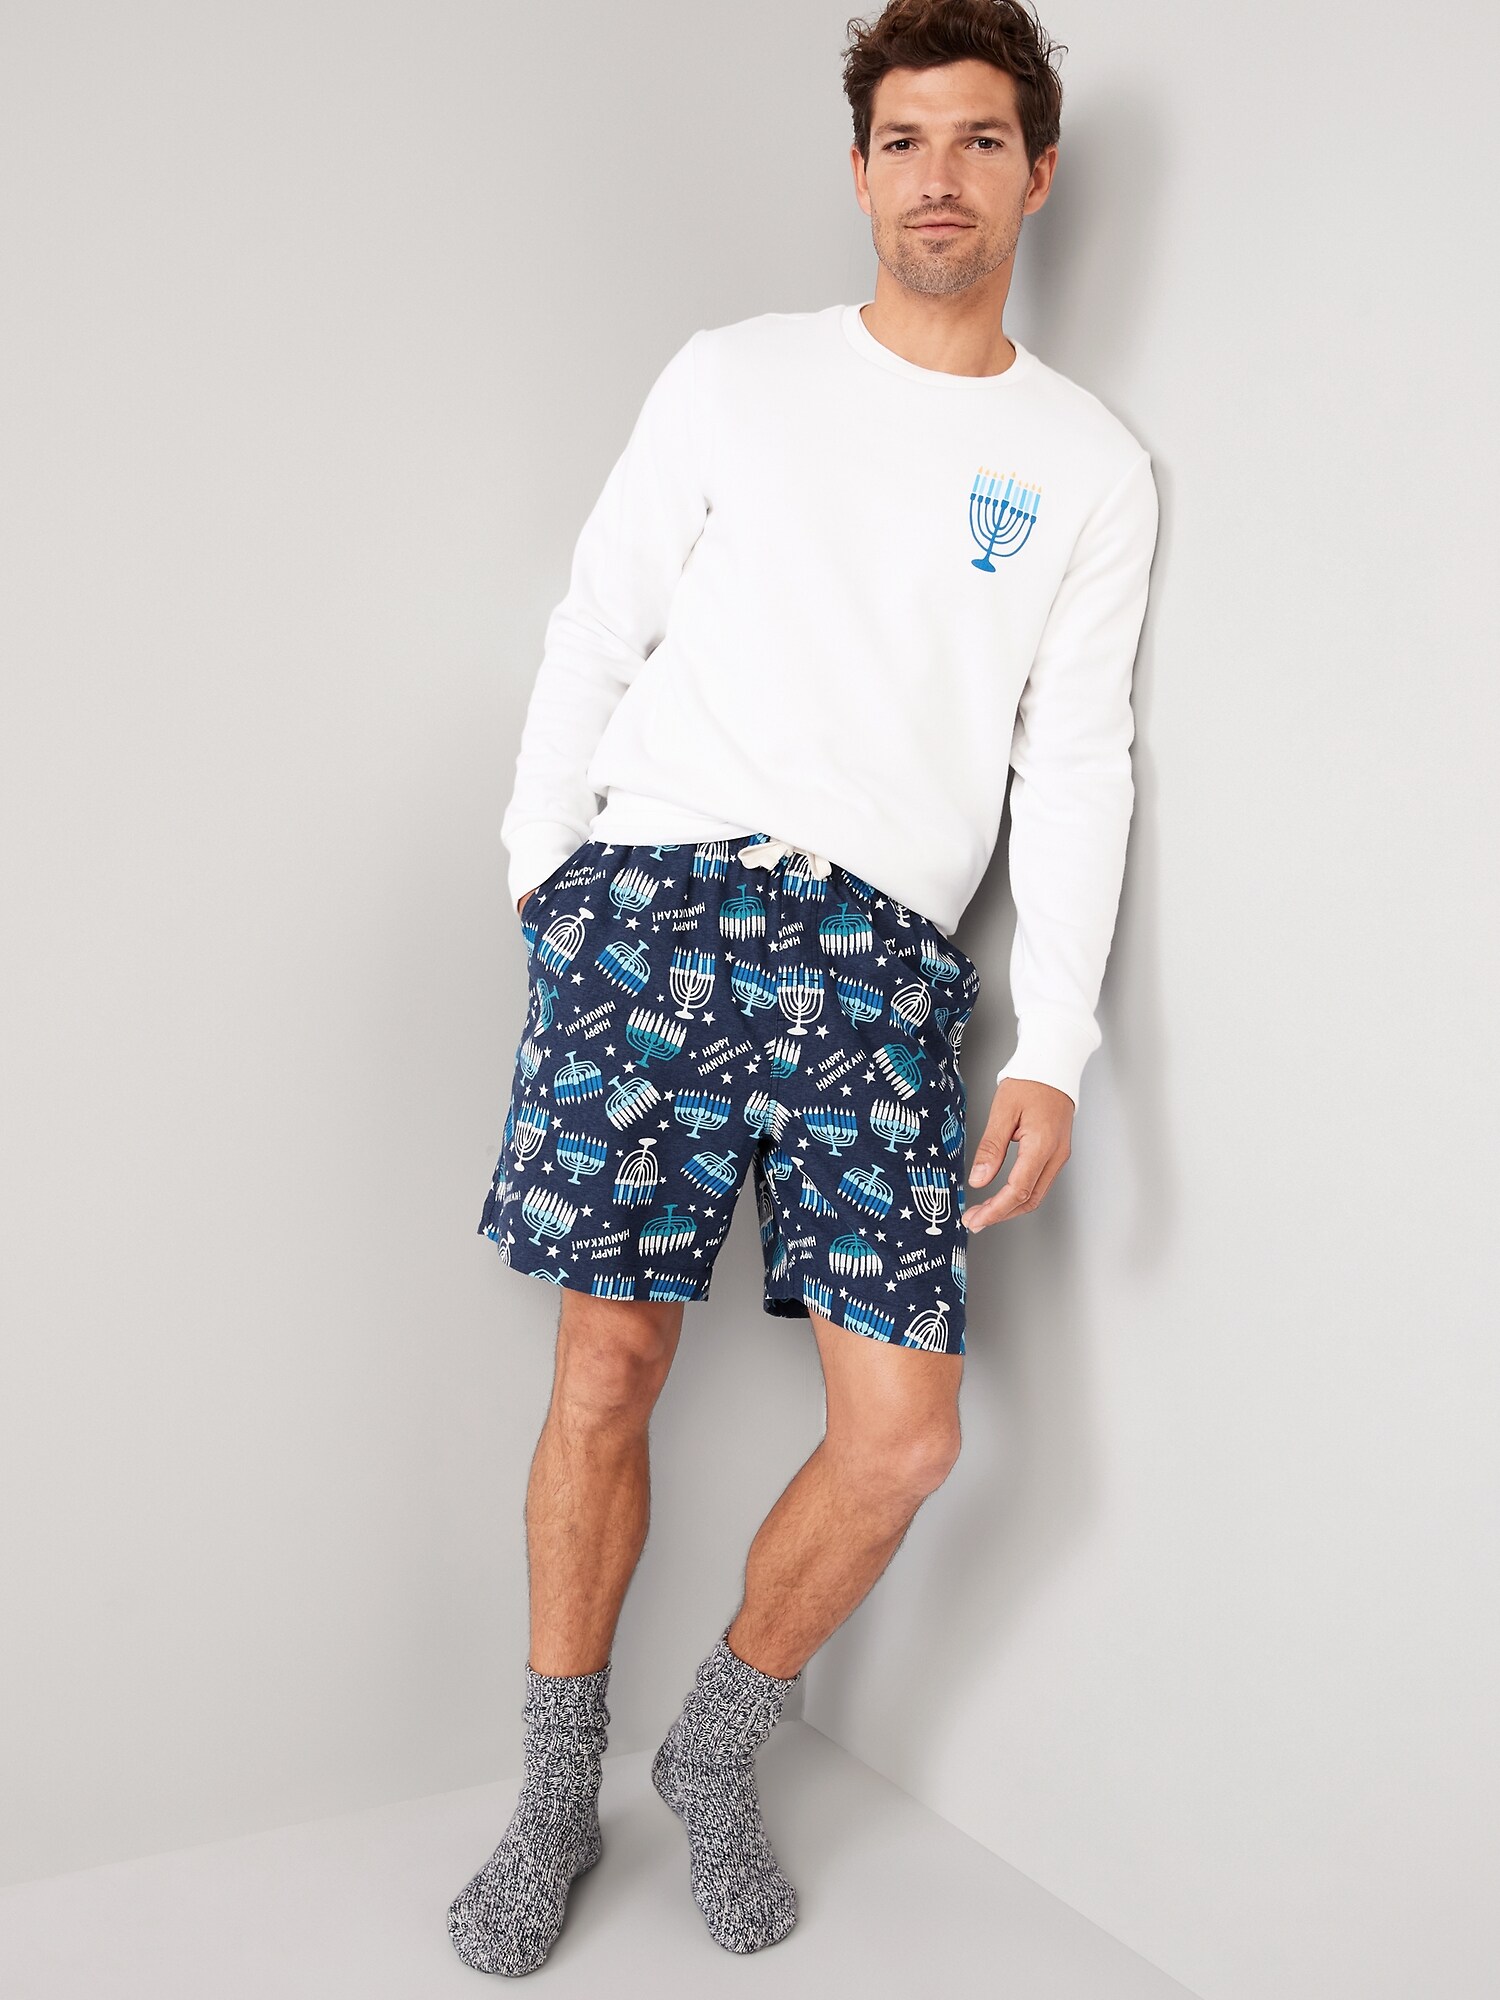 Matching Printed Flannel Pajama Shorts for Men -- 7-inch inseam